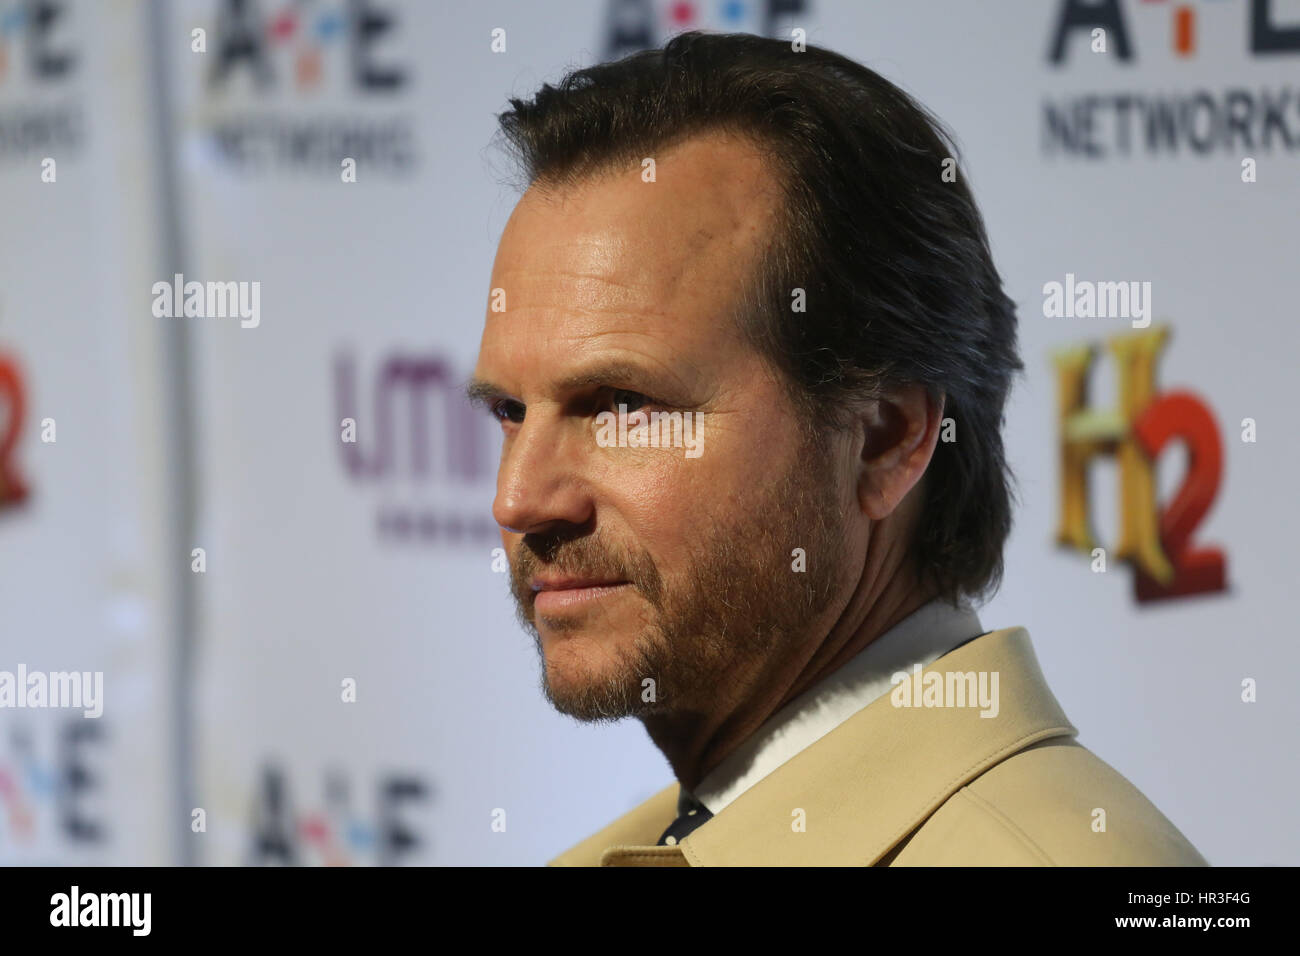 NEW YORK, NY - MAY 08: Bill Paxton attends the 2014 A+E Networks Upfront at Park Avenue Armory on May 8, 2014 in New York City. credit: Erik Pendzich Stock Photo